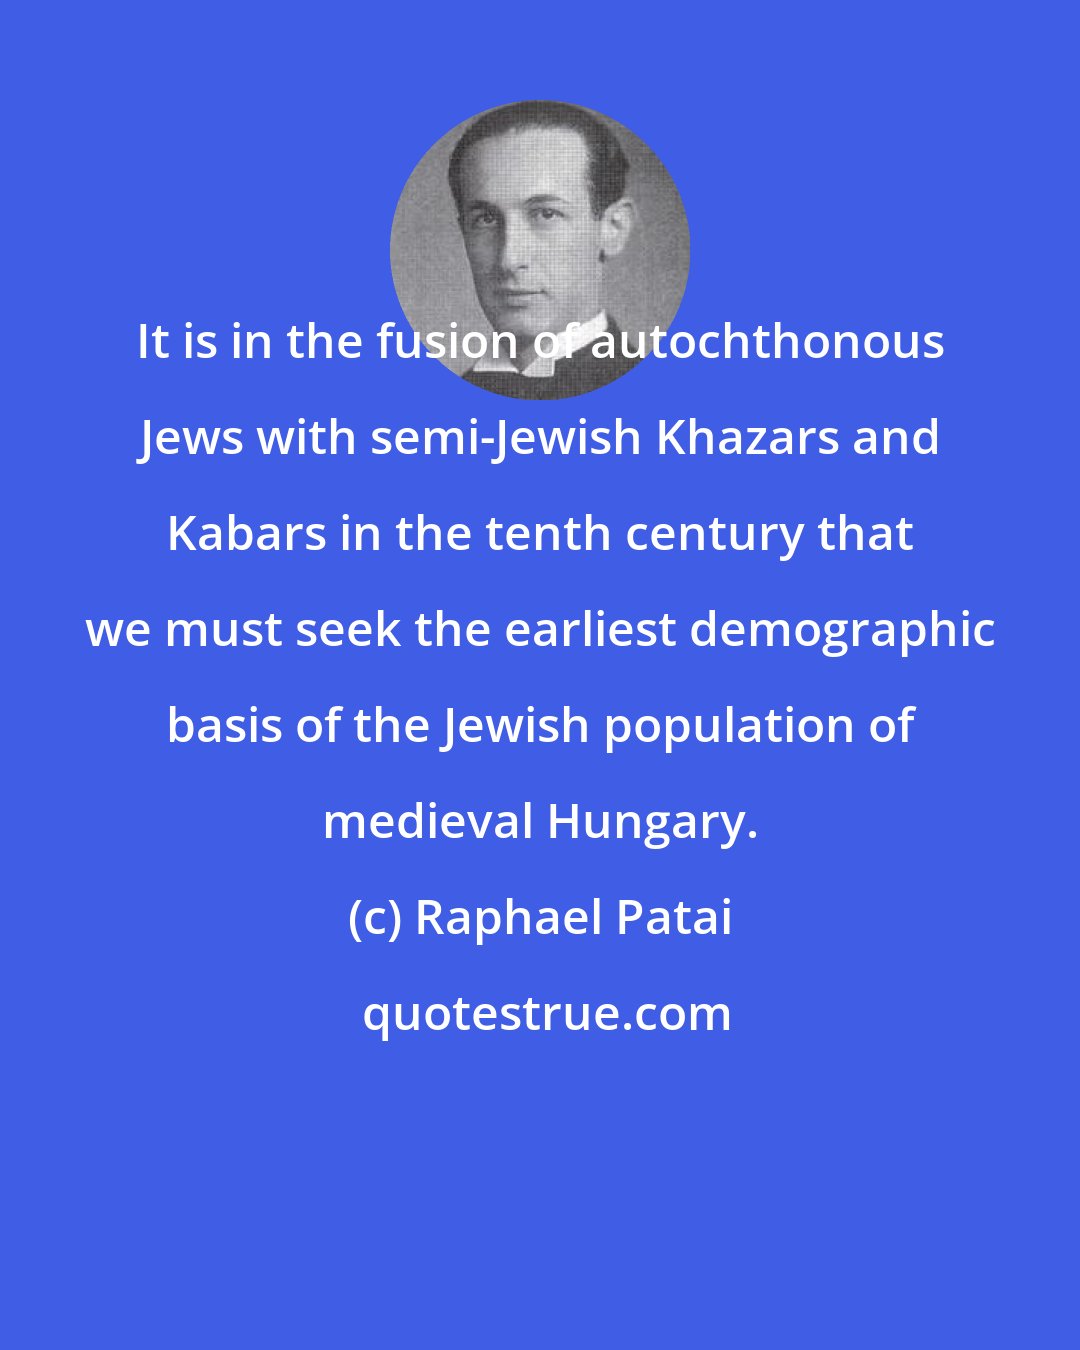 Raphael Patai: It is in the fusion of autochthonous Jews with semi-Jewish Khazars and Kabars in the tenth century that we must seek the earliest demographic basis of the Jewish population of medieval Hungary.